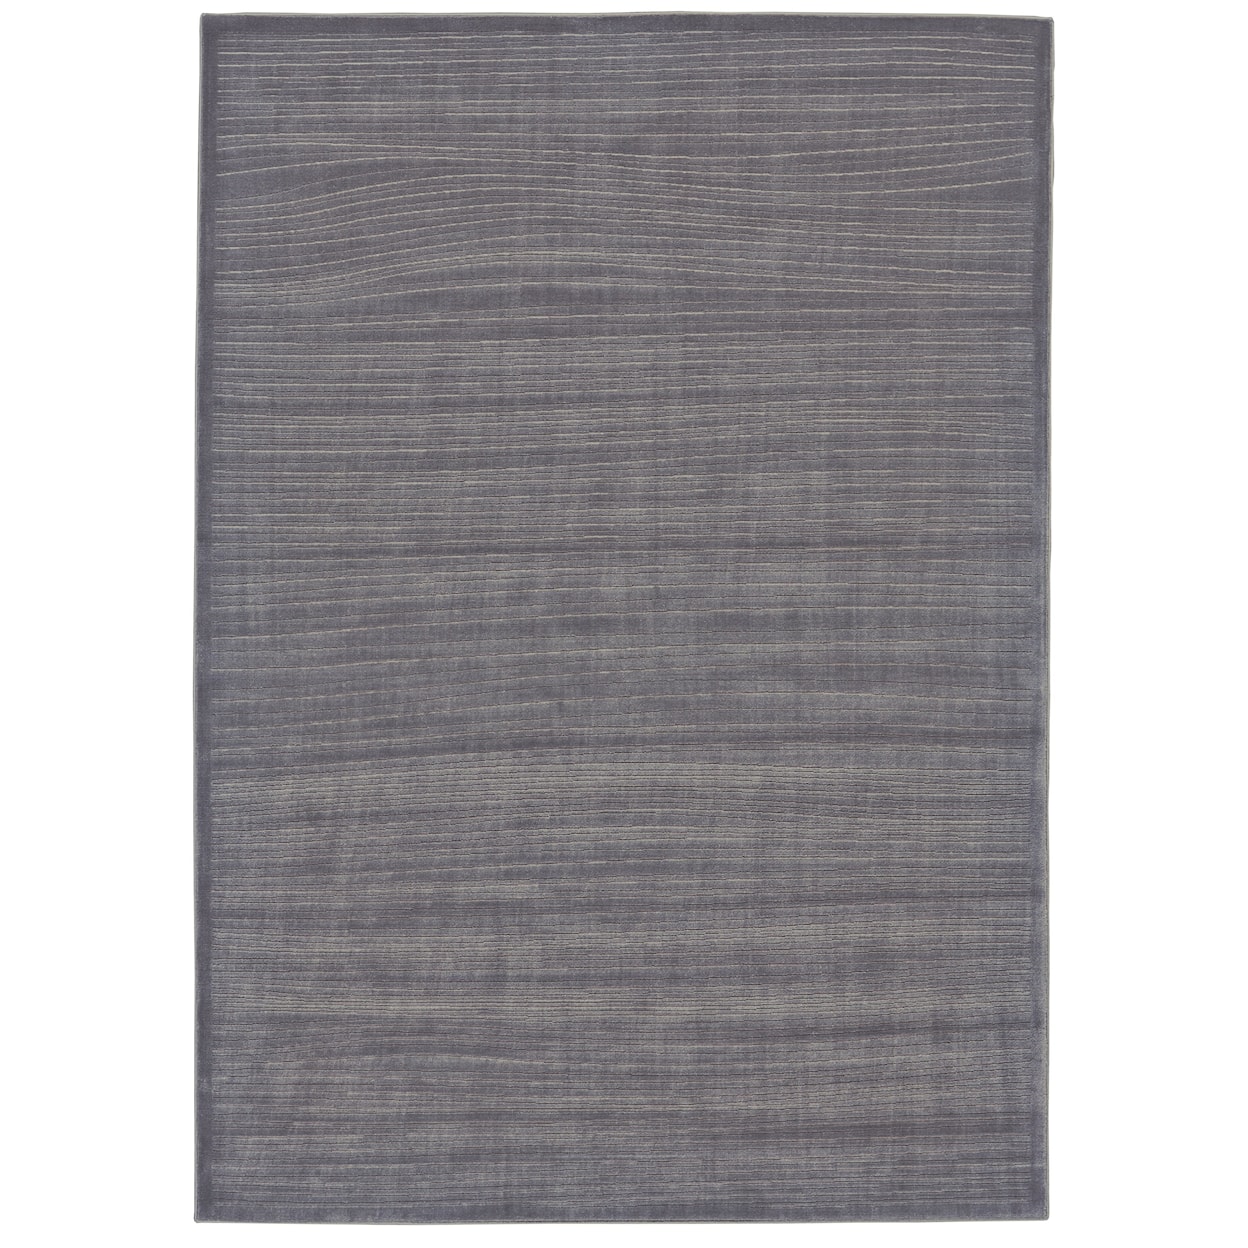 Feizy Rugs Melina Sterling/White 5' x 8' Area Rug